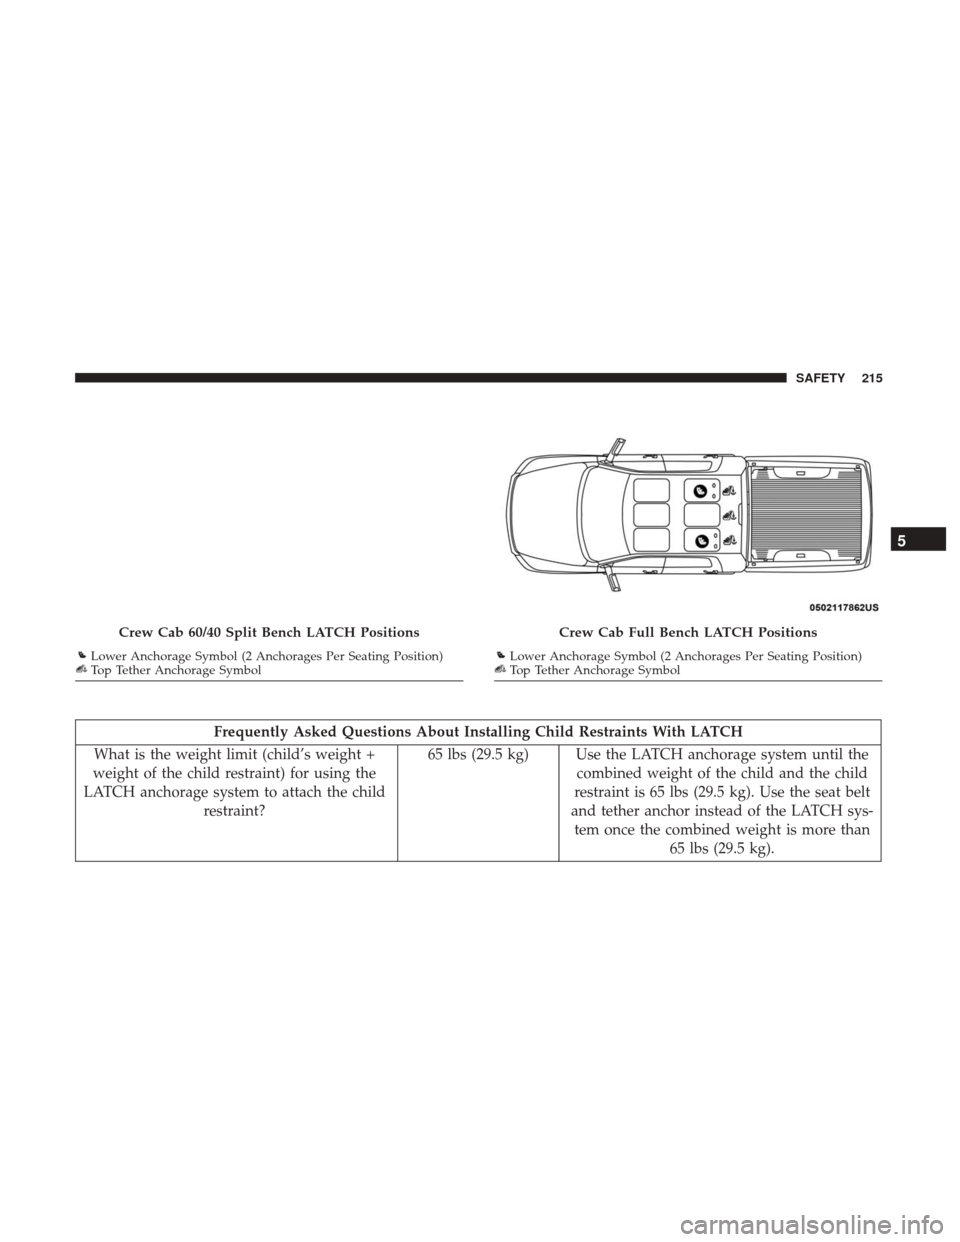 Ram 4500 Chassis Cab 2018  Owners Manual Frequently Asked Questions About Installing Child Restraints With LATCH
What is the weight limit (child’s weight +
weight of the child restraint) for using the
LATCH anchorage system to attach the c